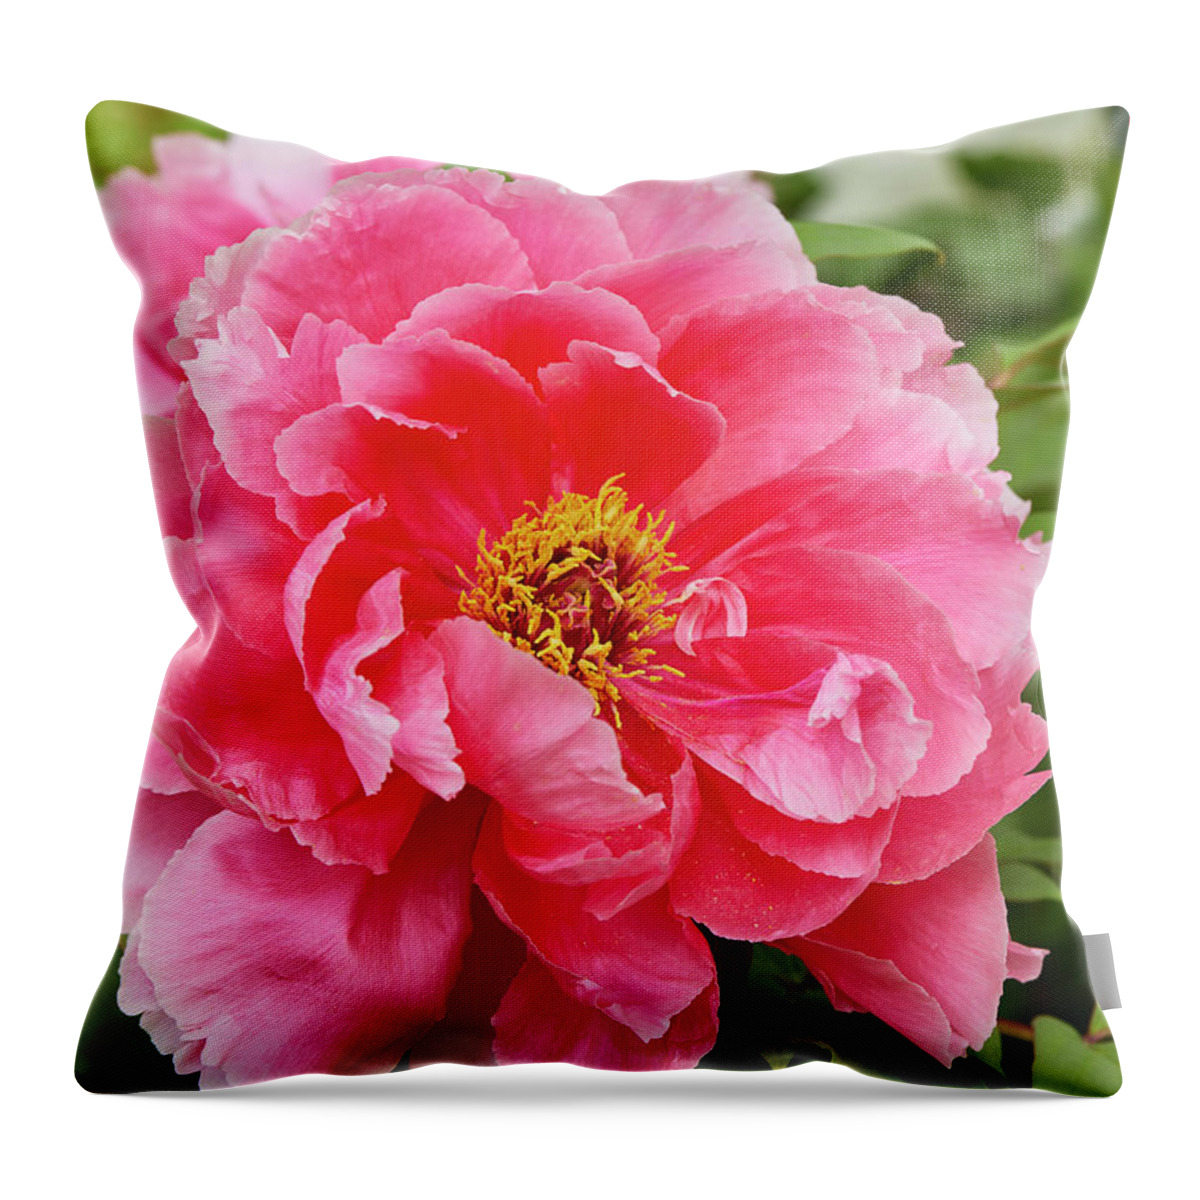 Garden Gate Throw Pillow featuring the photograph Tree peony by Garden Gate magazine